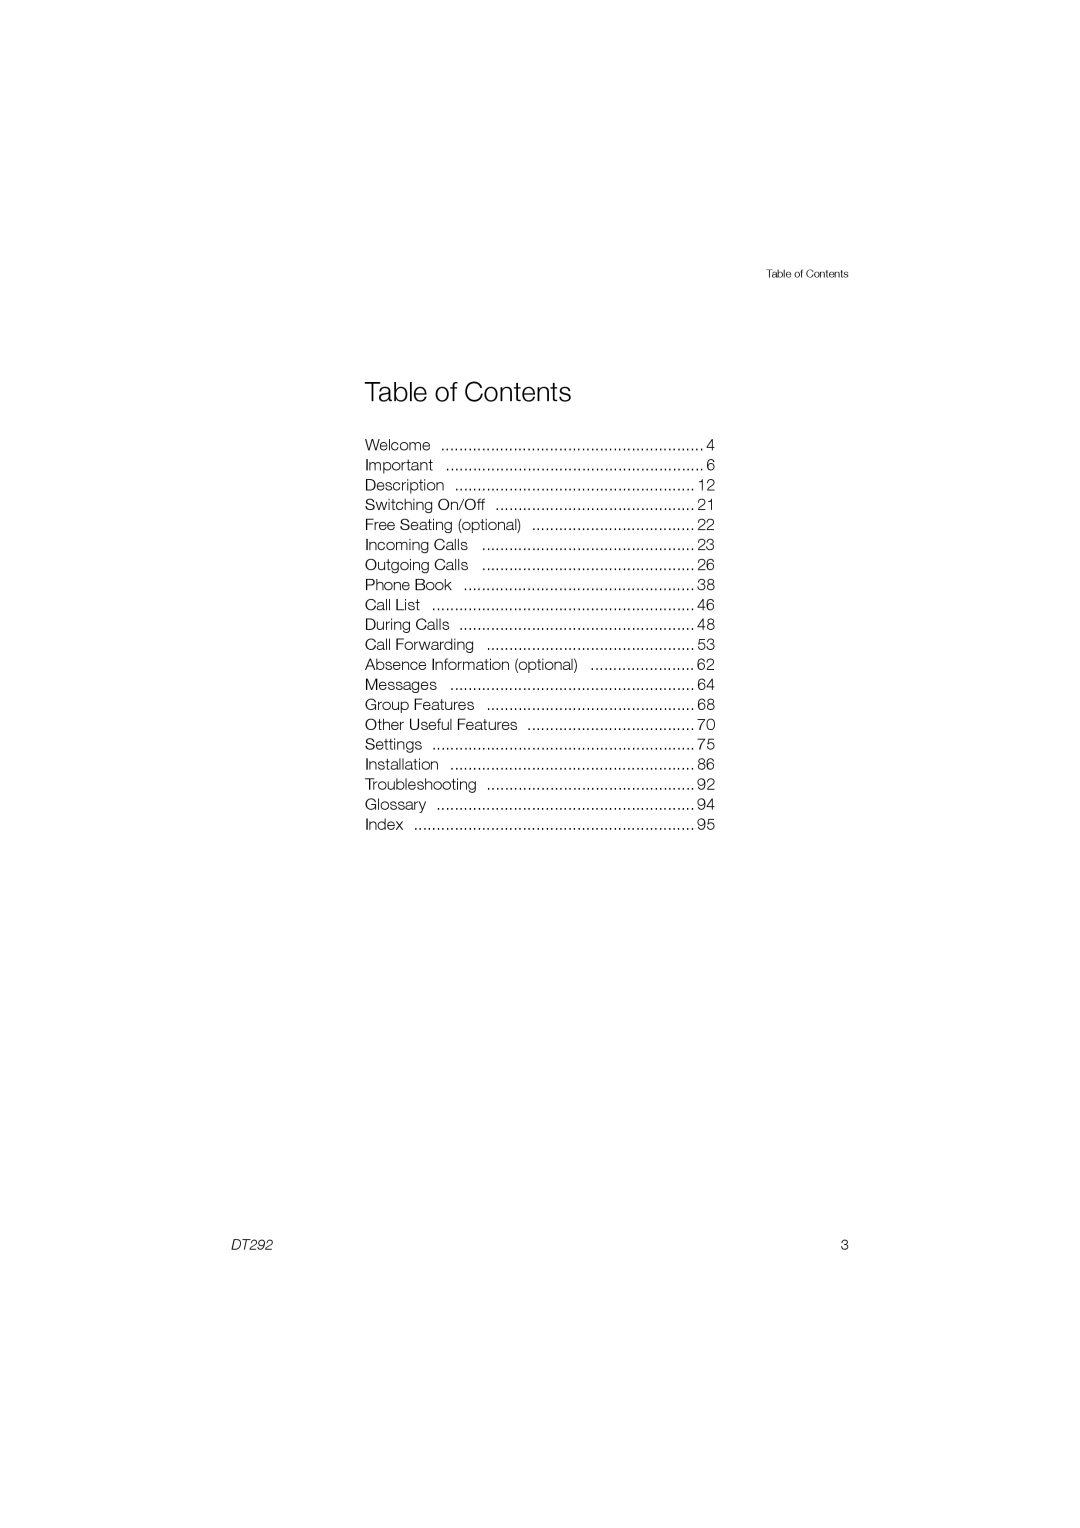 Ericsson DT292 manual Table of Contents 